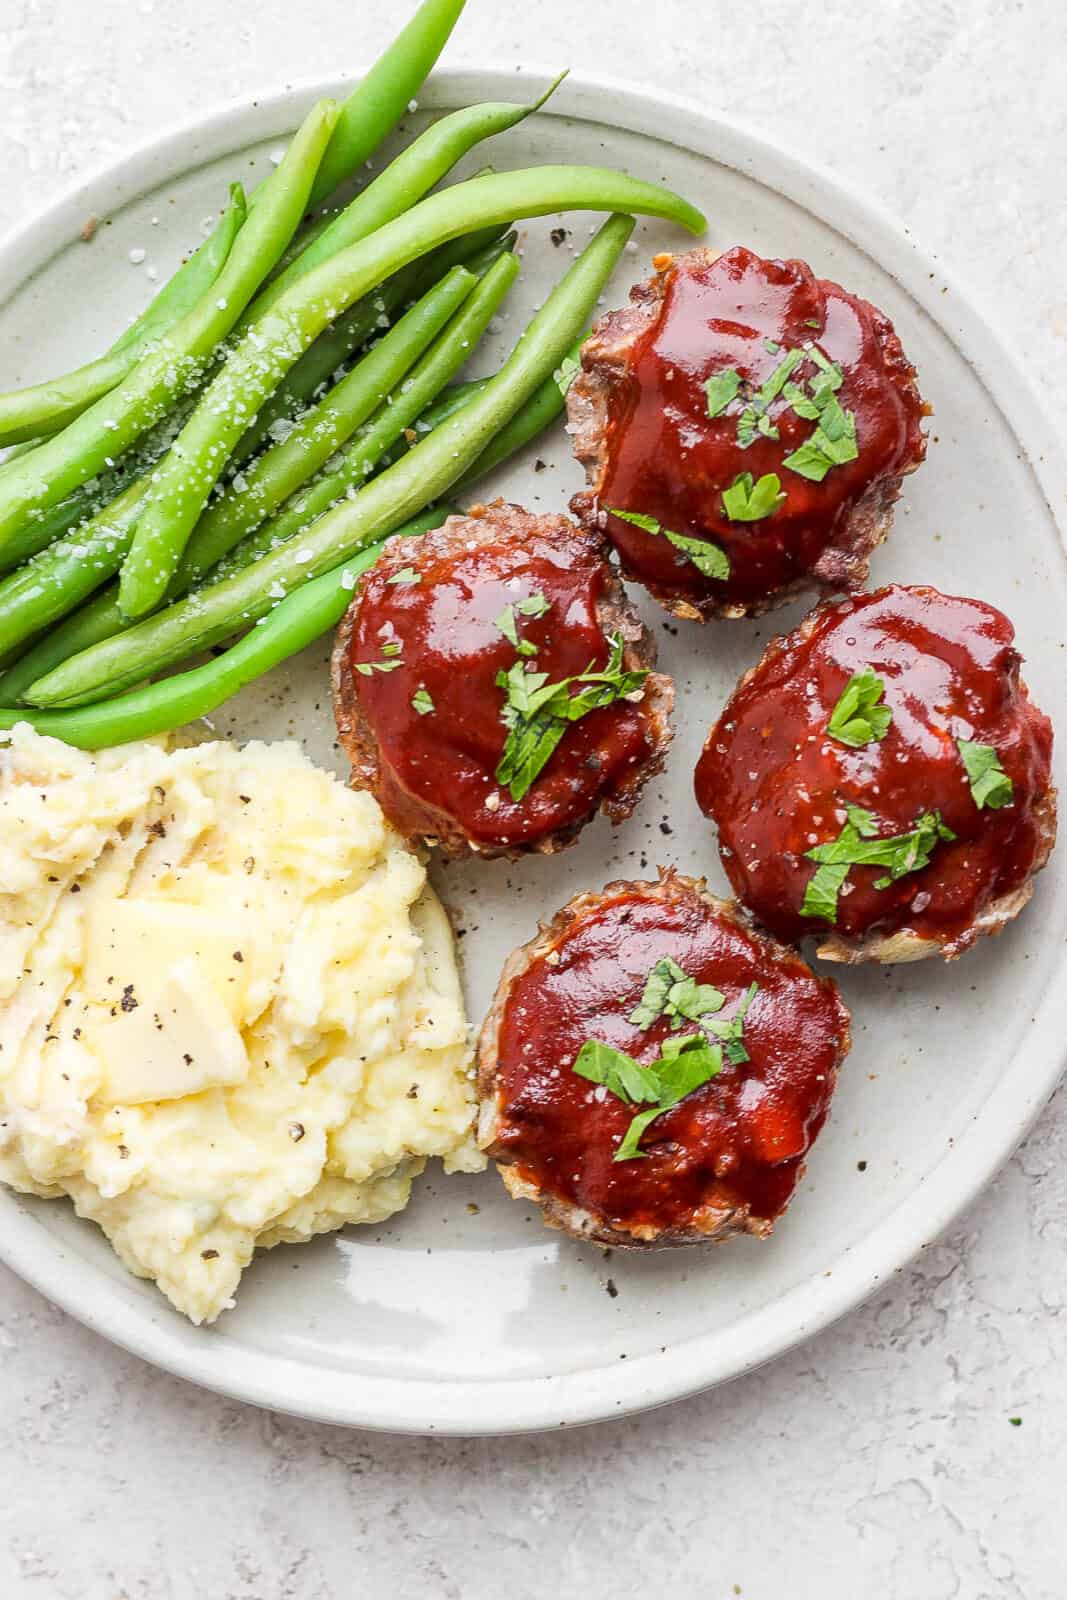 Plate of mini meatloaf muffins with glaze on a plate with mashed potatoes and green beans.